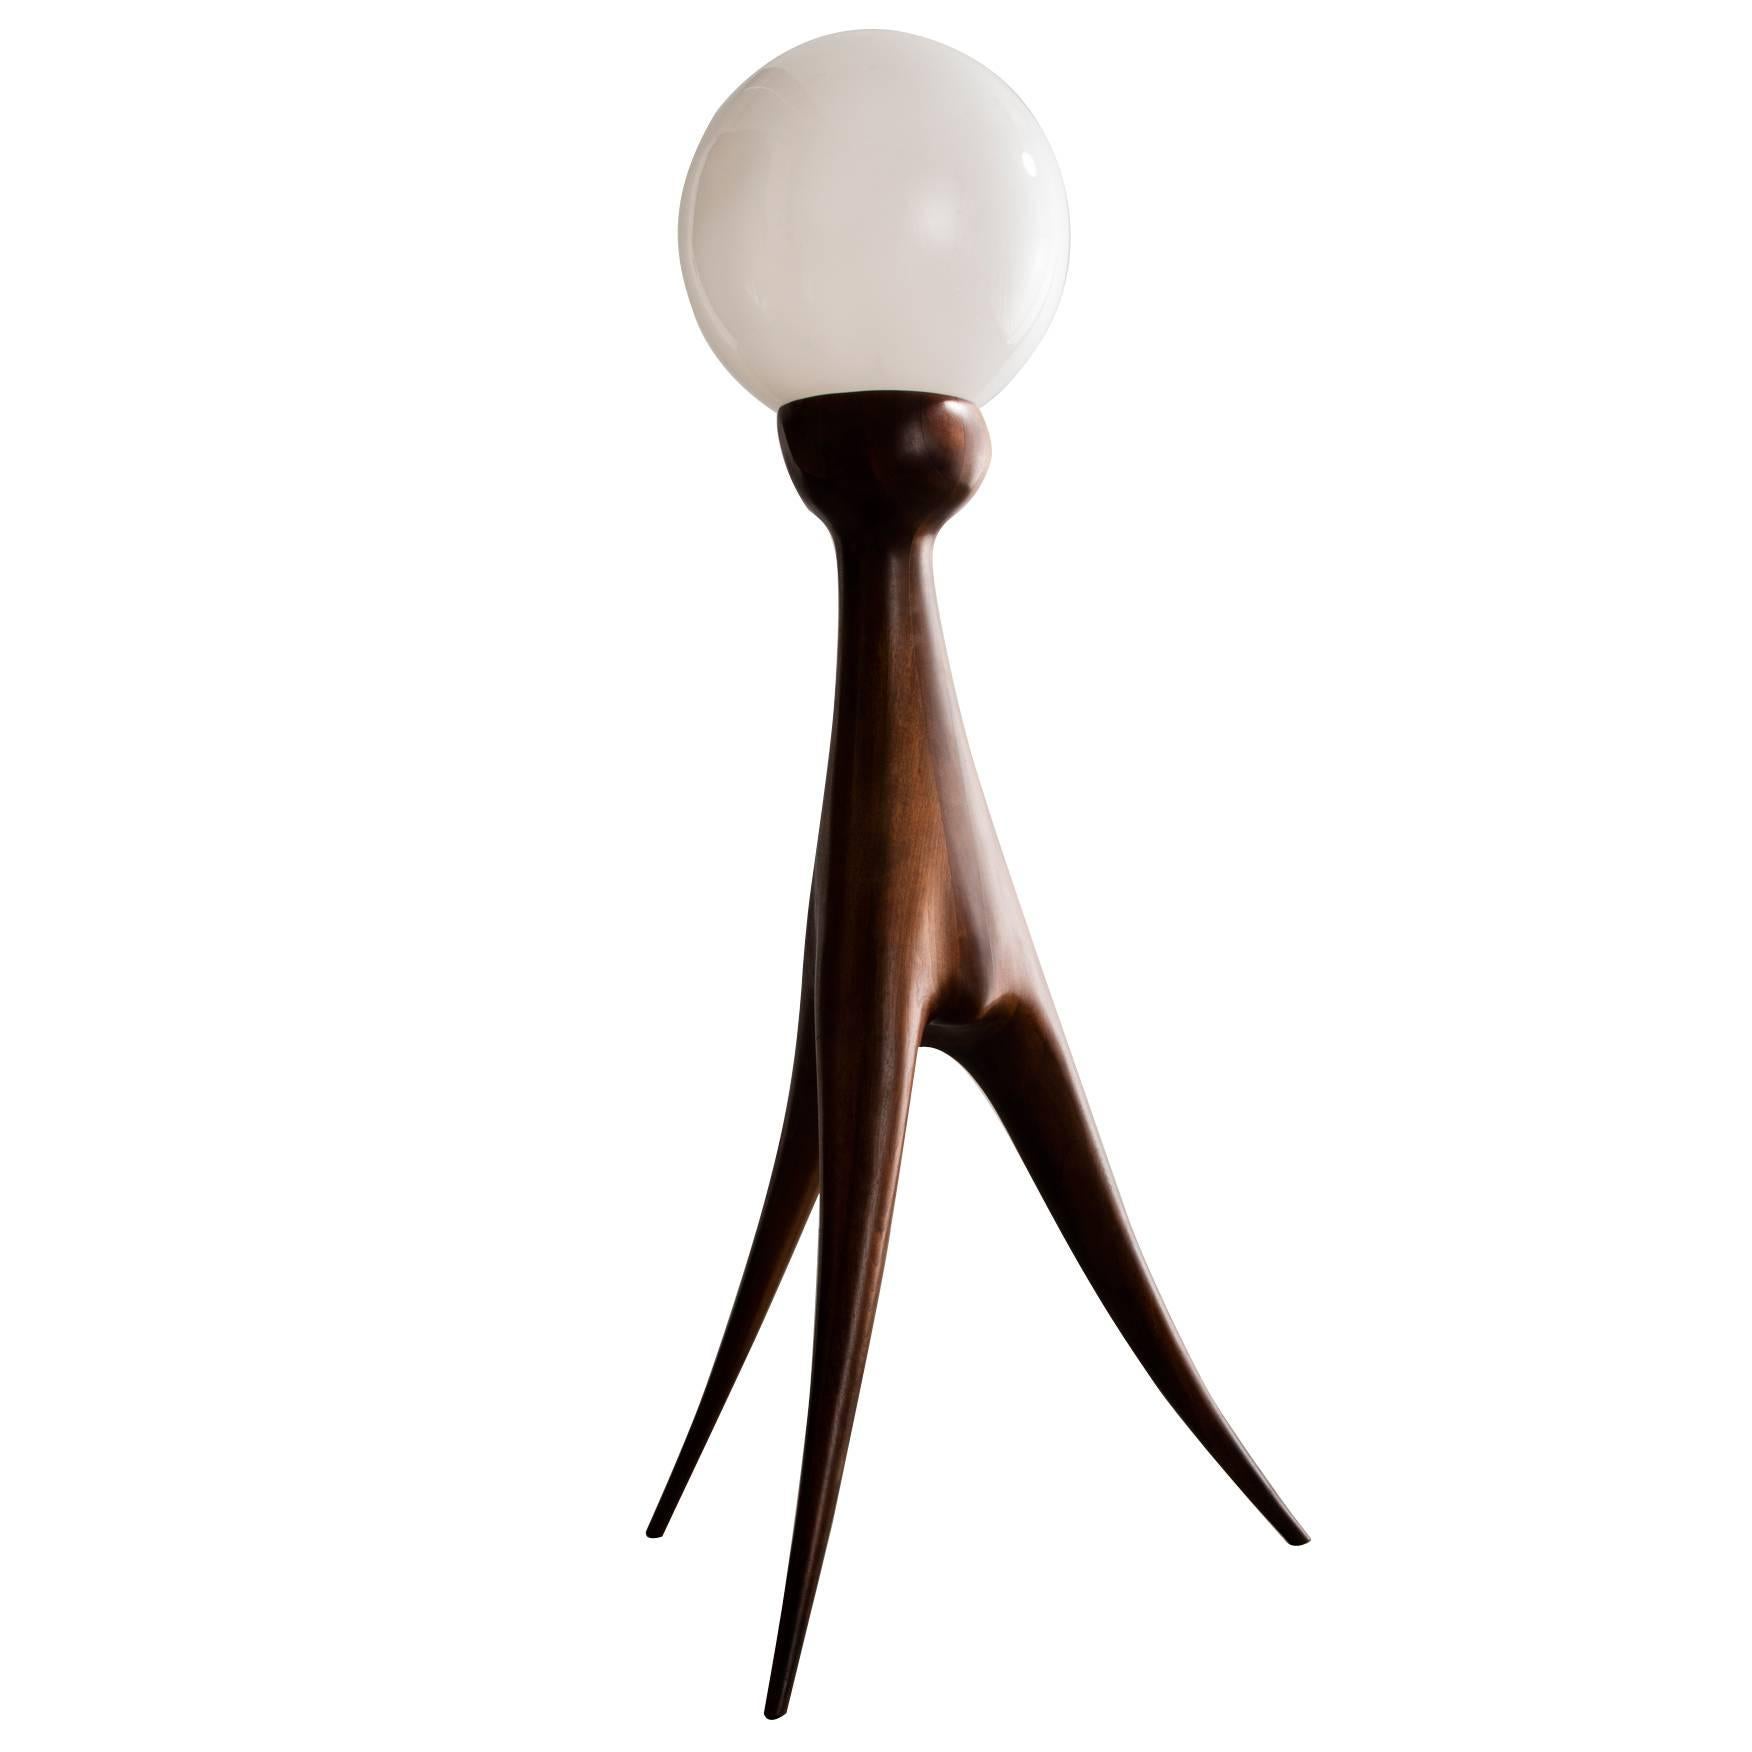 Unique Hand-Shaped Floor Lamp by Wendell Castle, New York, circa 1966